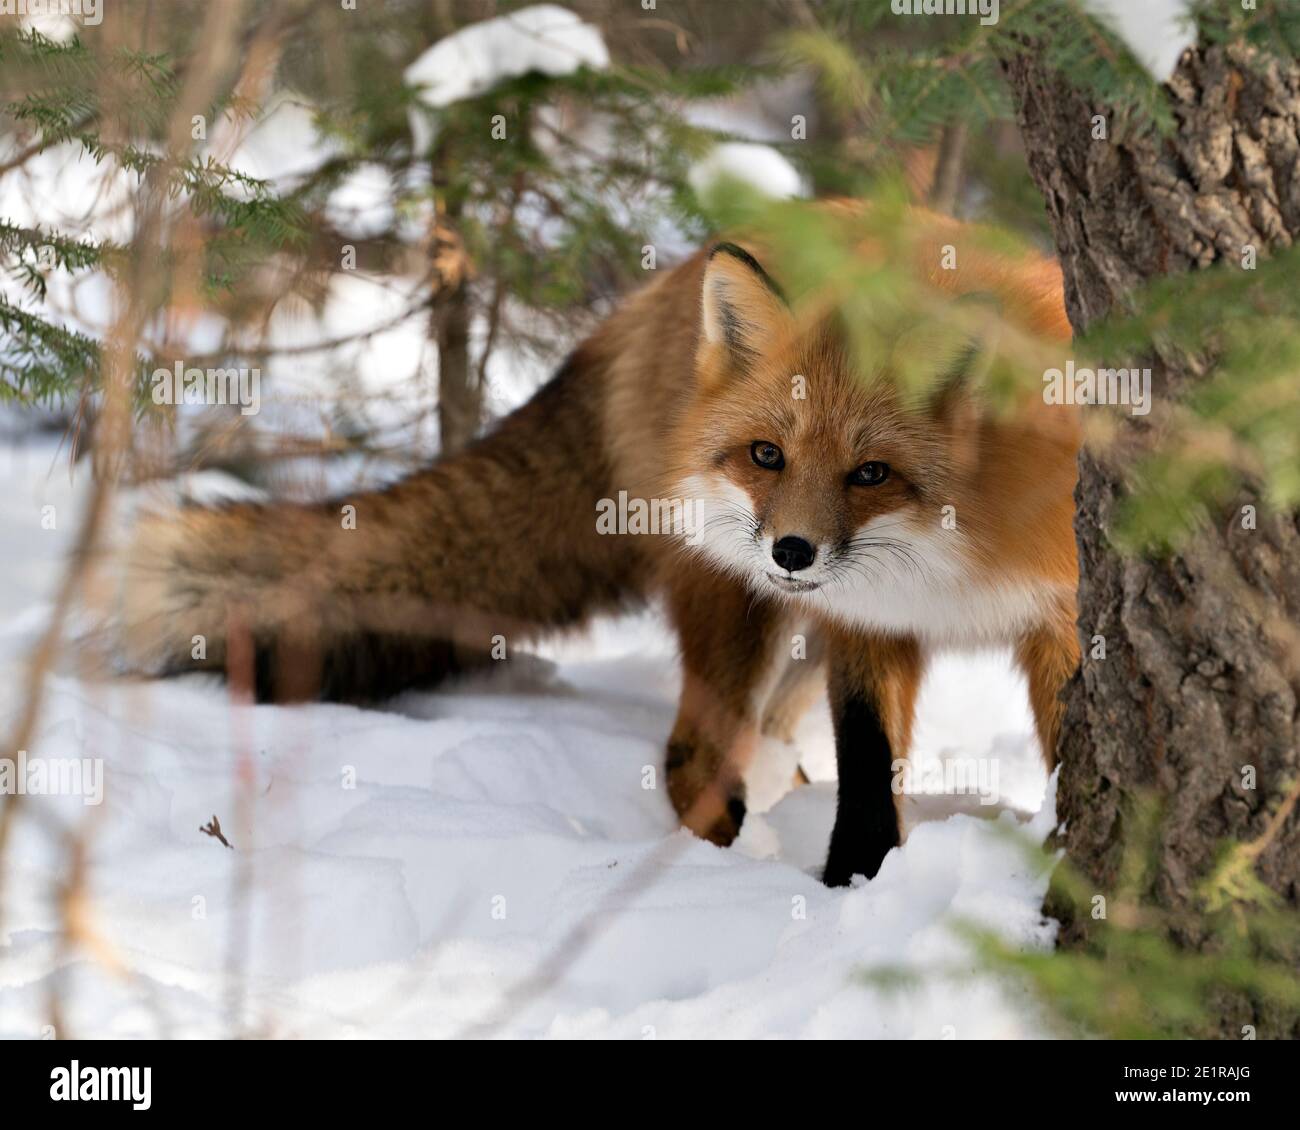 Red fox looking at camera in the winter season in its environment with snow and branches background displaying bushy fox tail, fur. Fox Image. Picture Stock Photo